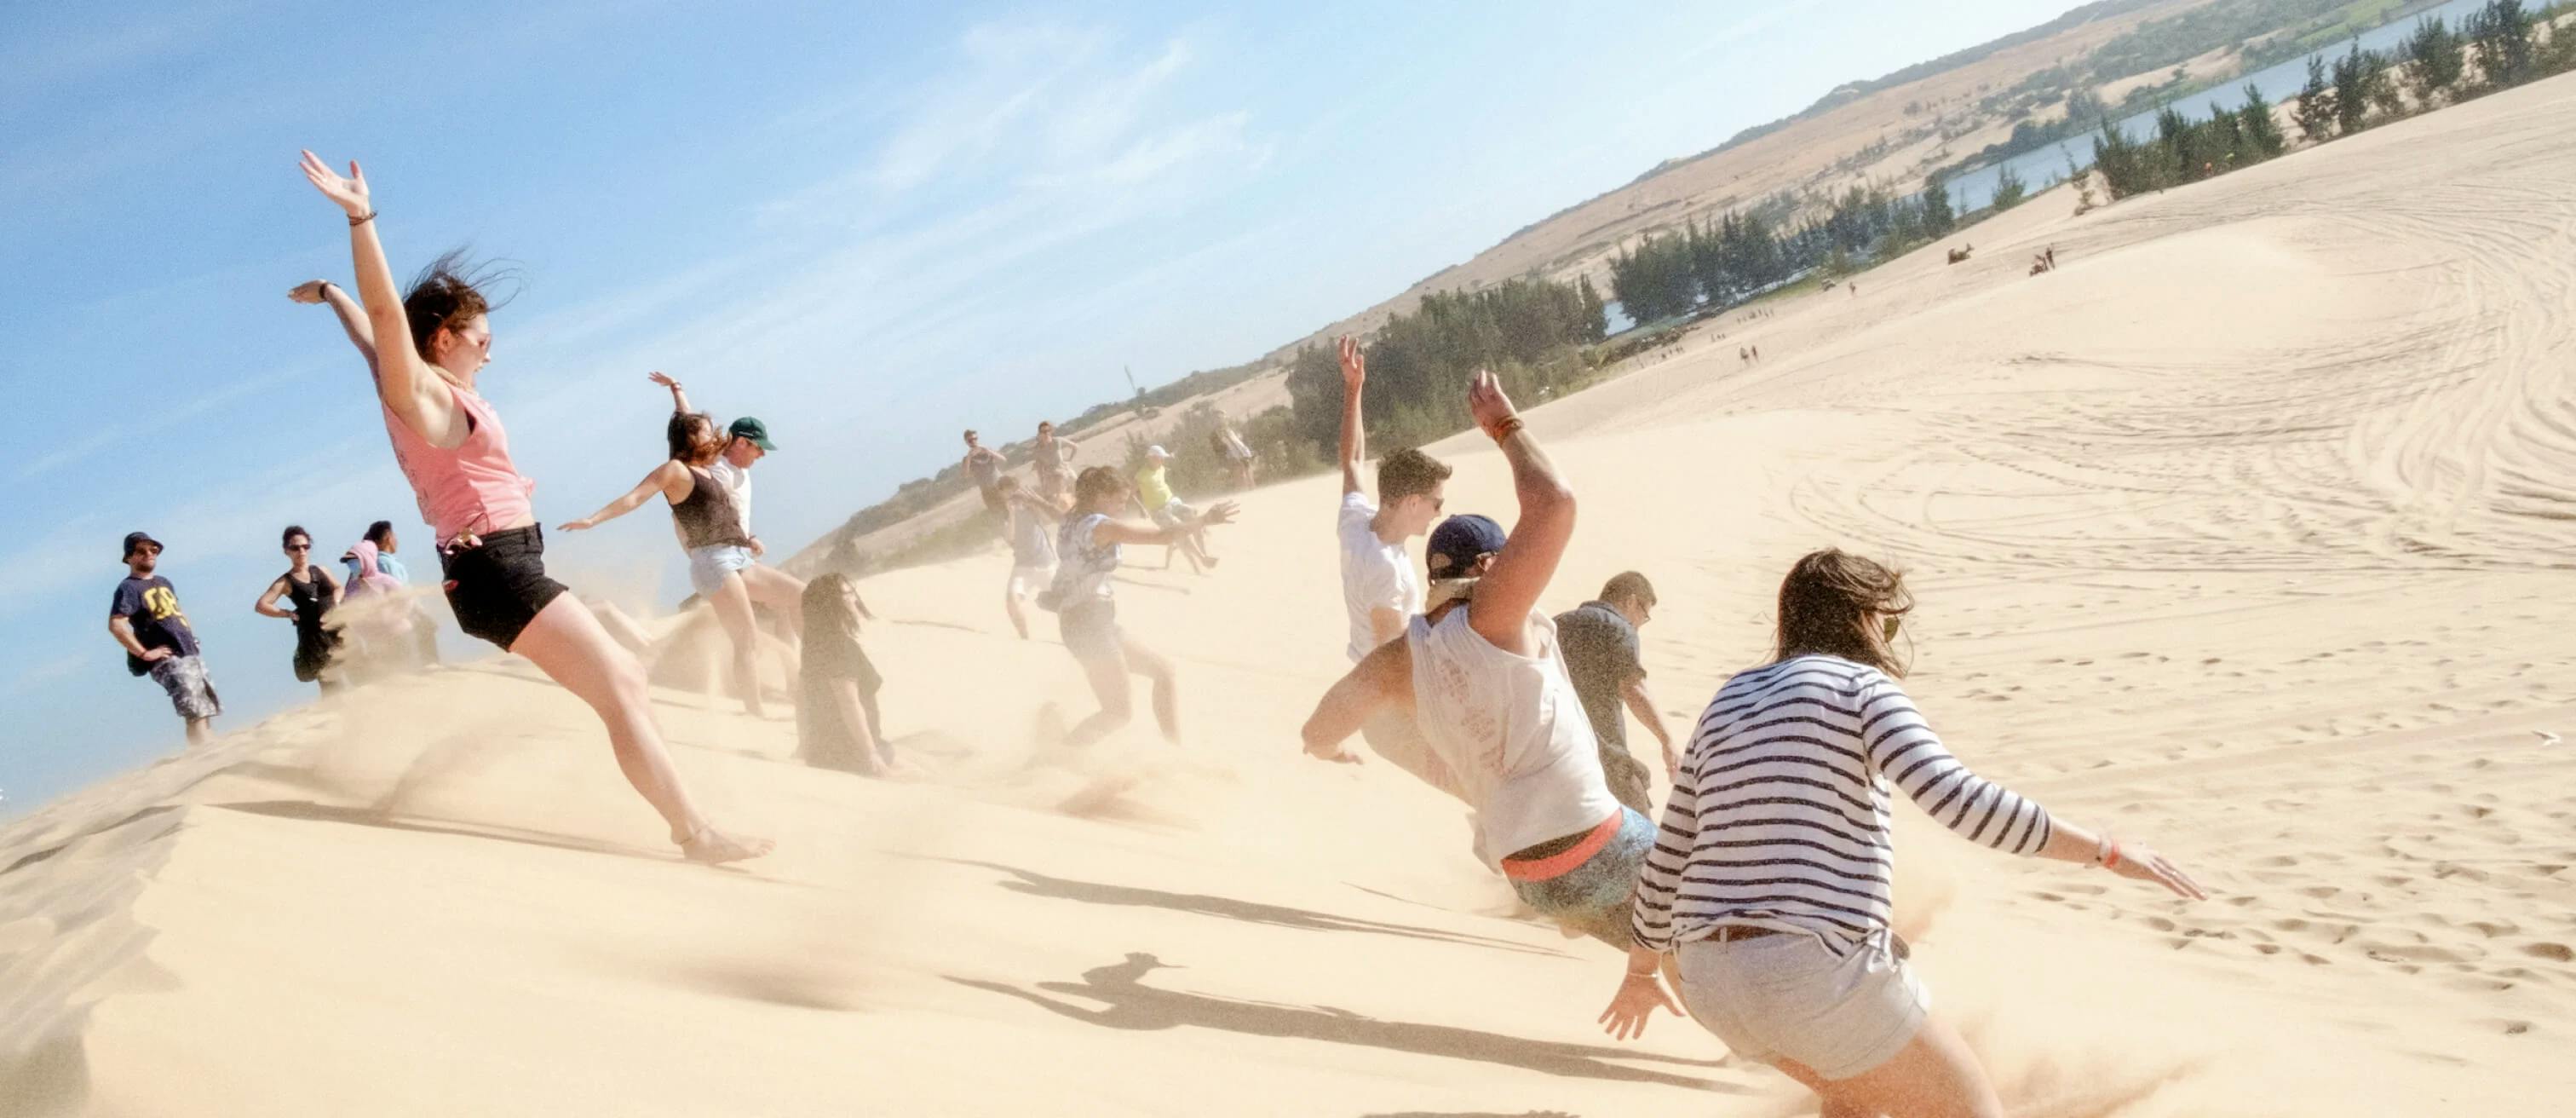 people jumping in sand dunes